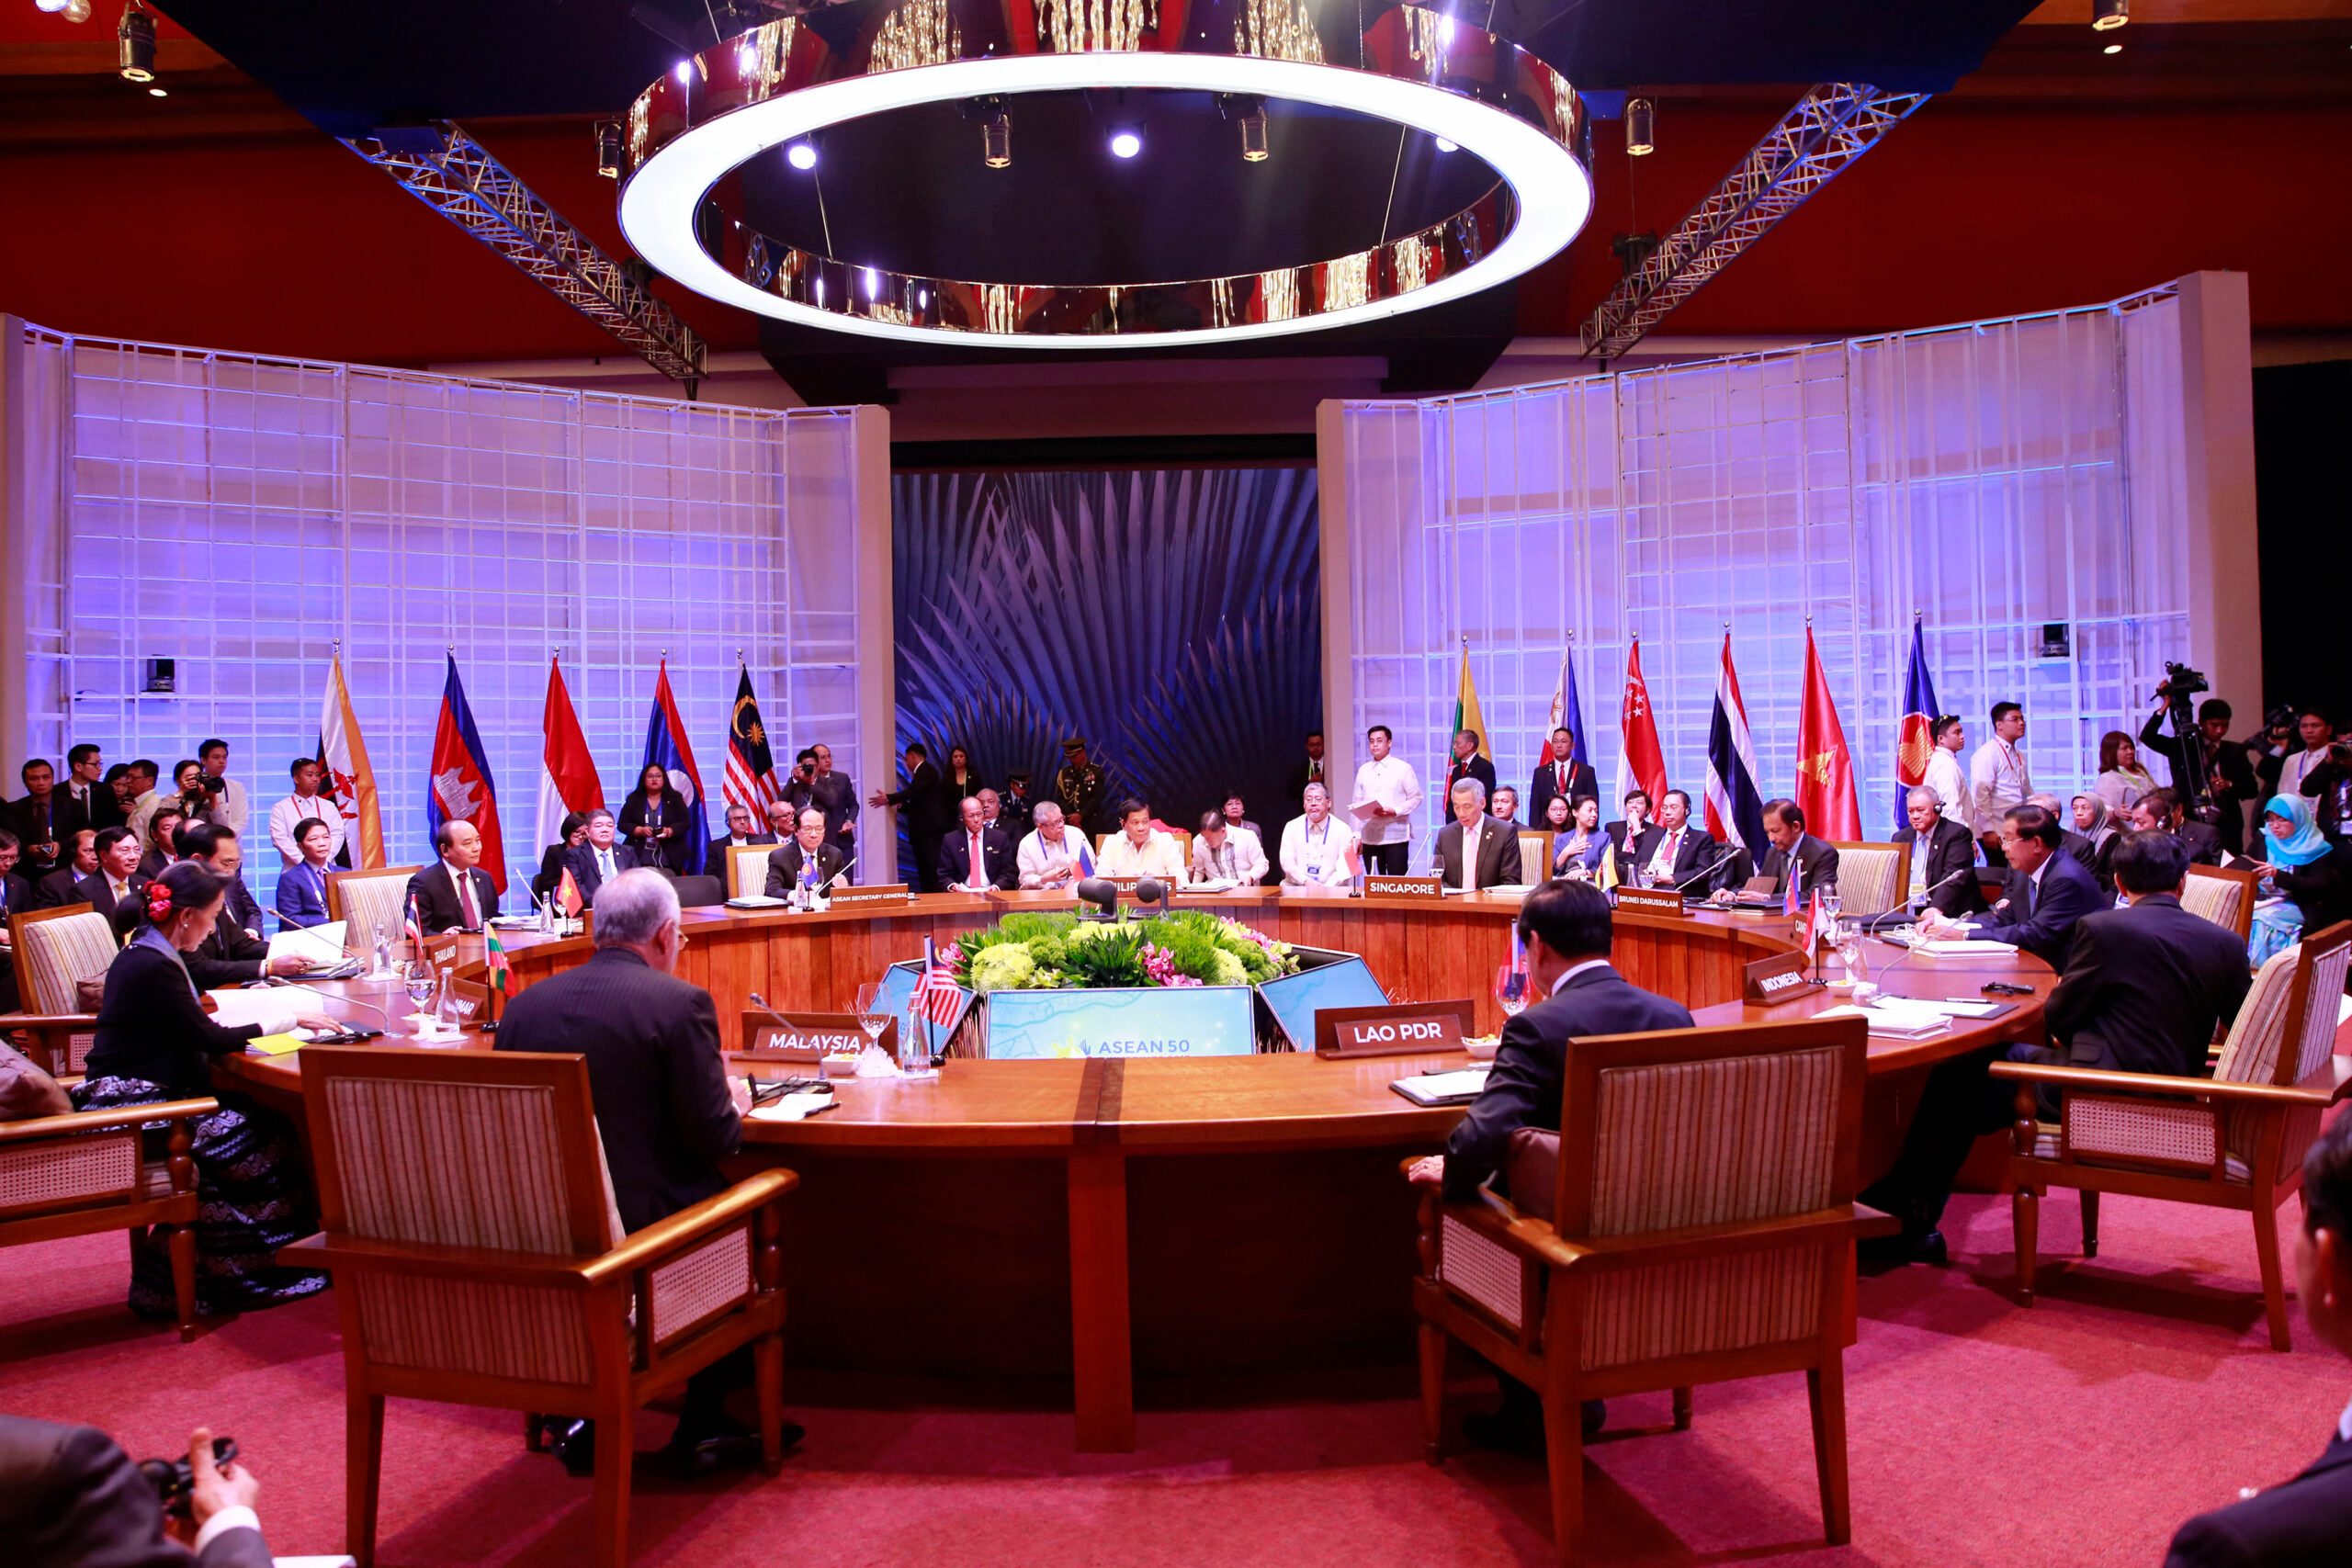 In a nutshell: Issues up for discussion at 31st ASEAN Summit